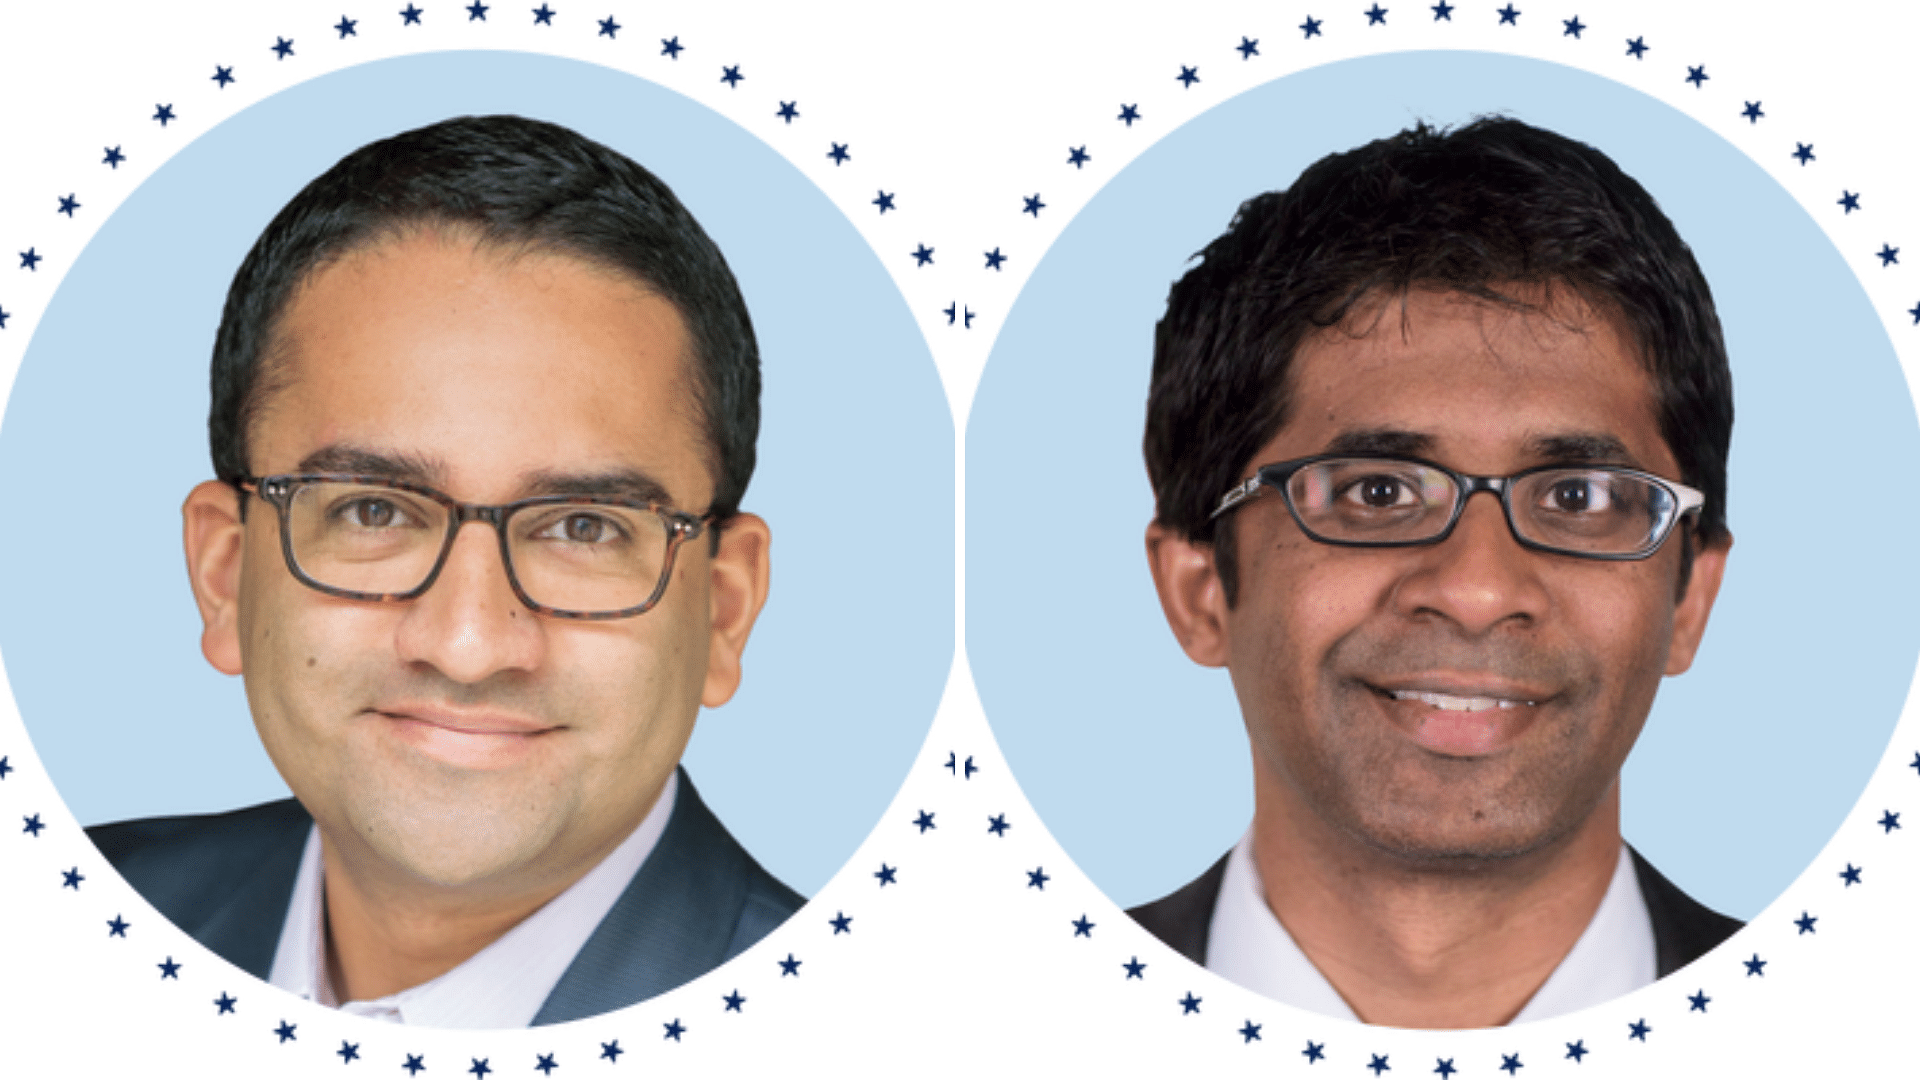 Indian-American Gautam Raghavan will be appointed Deputy Director in the Office of Presidential Personnel and Biden’s long-time associate Vinay Reddy will be the Director of Speechwriting.